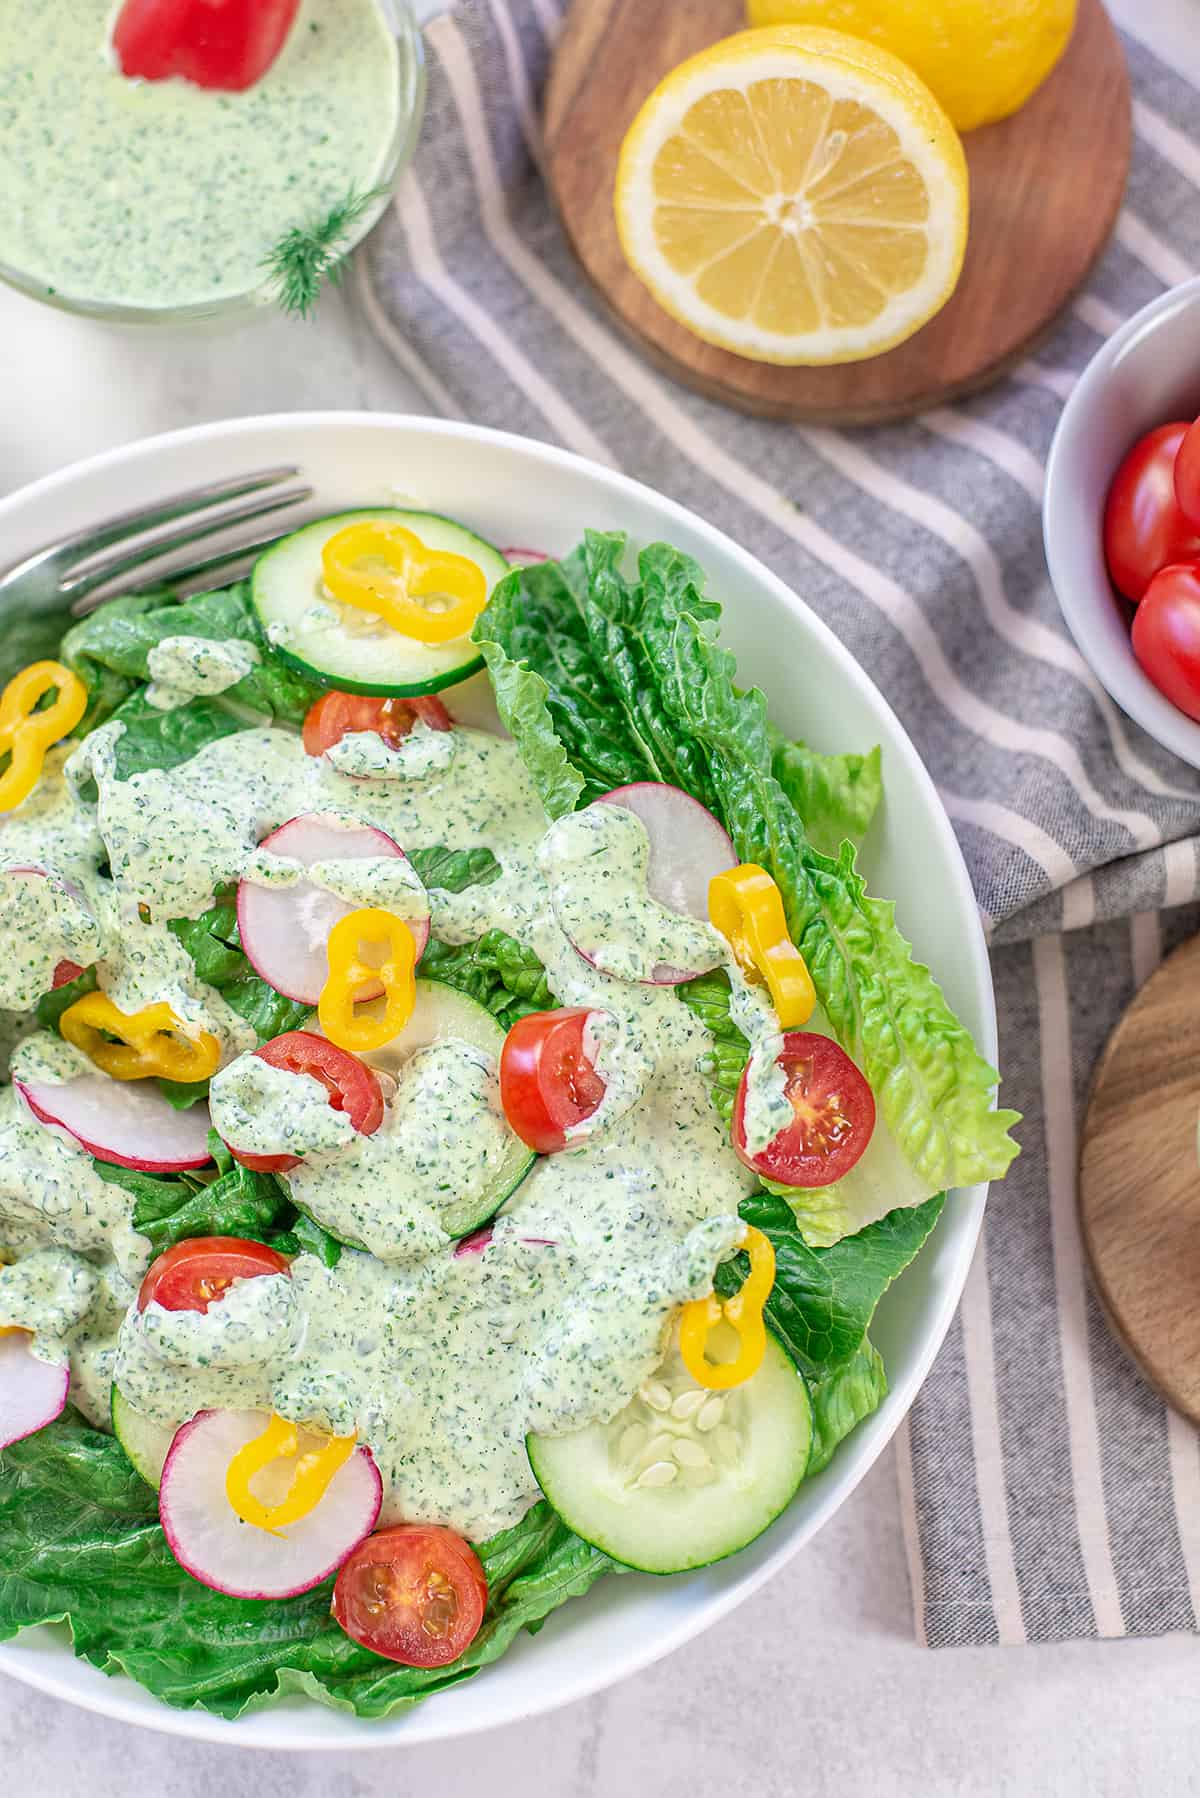 salad topped with green goddess dressing.